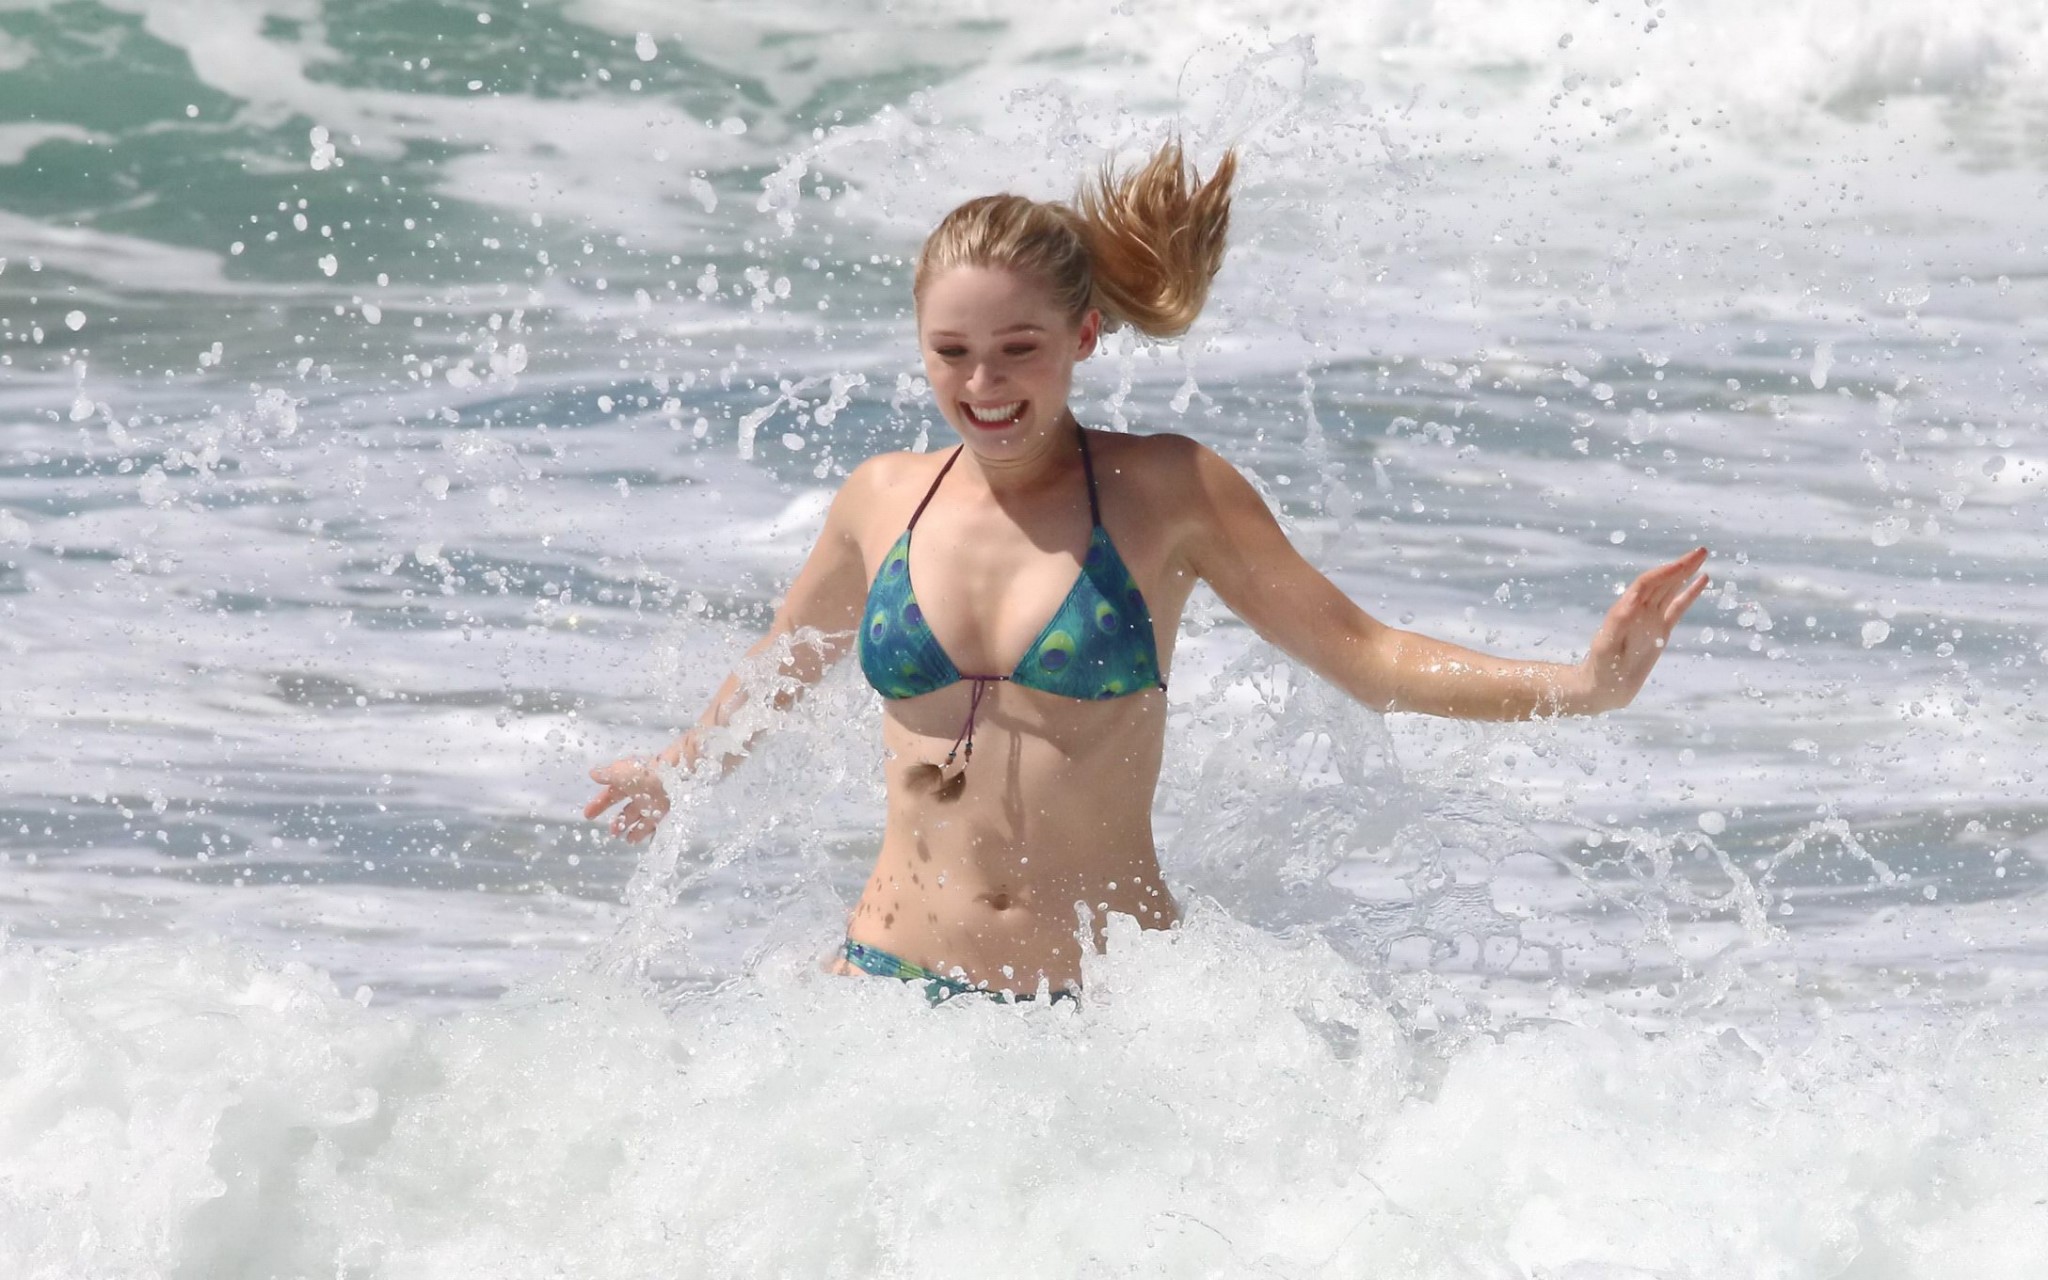 Greer Grammer busty in tiny peacock feather print bikini at the beach in Los Ang #75168215